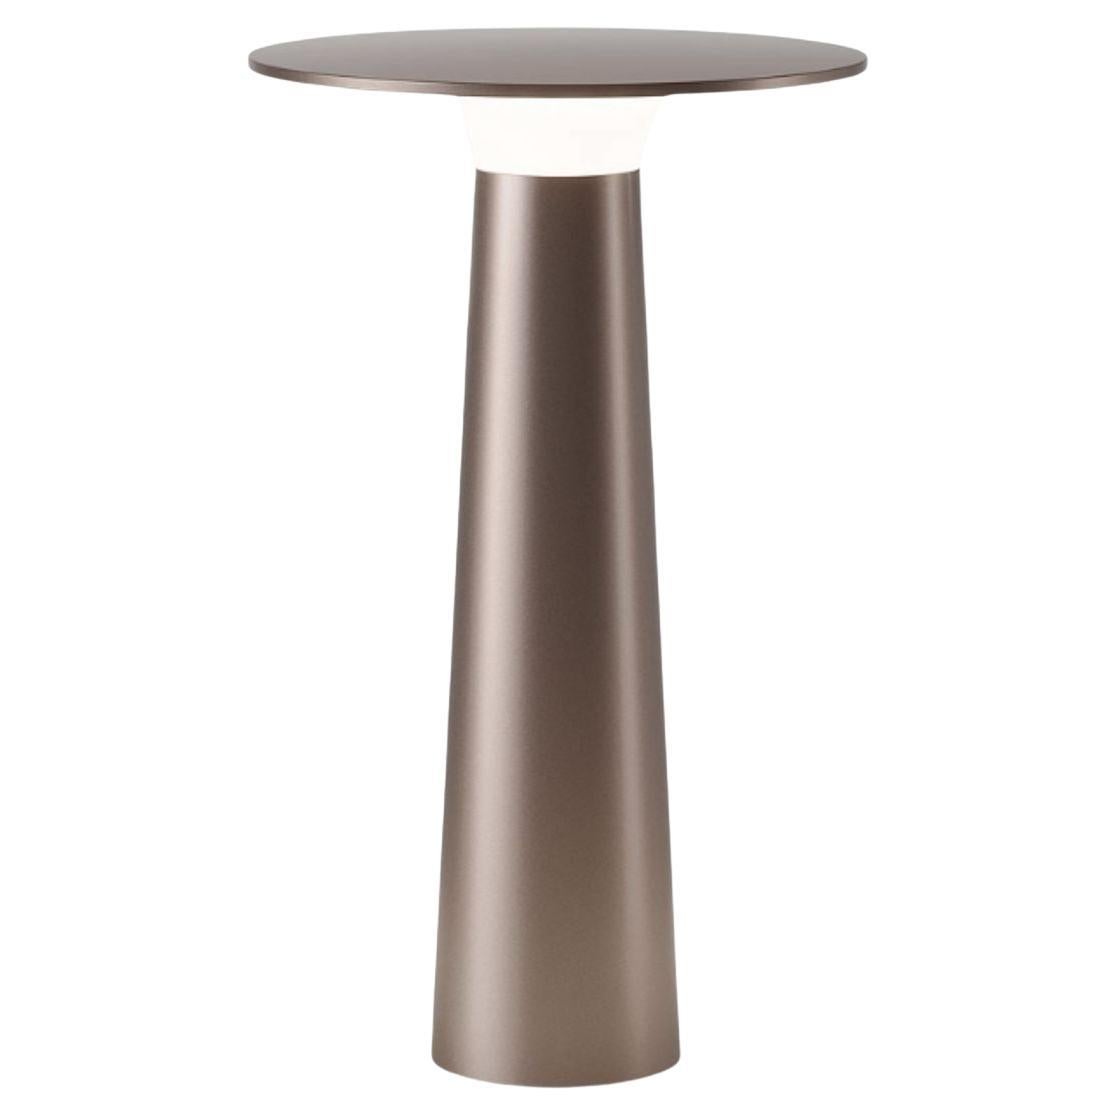 Contemporary Klaus Nolting 'Lix' Portable Outdoor Aluminum Table Lamp in Black for Ip44de For Sale